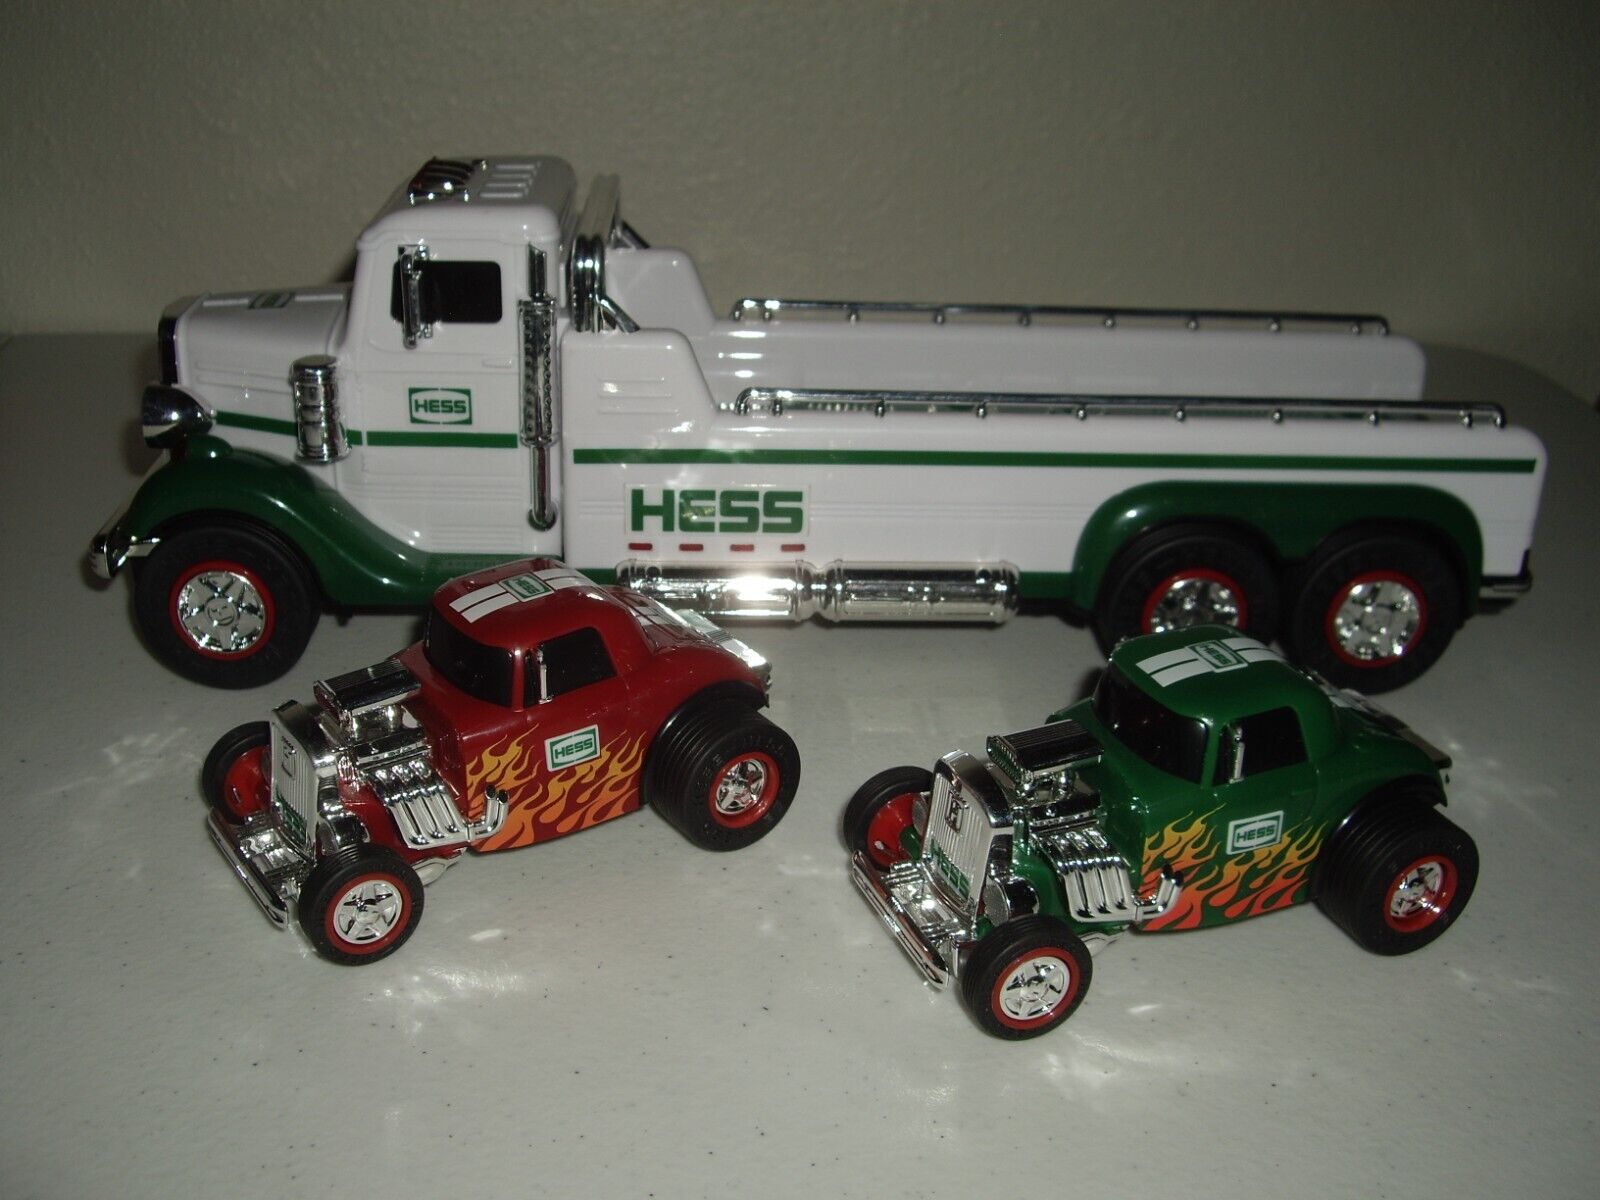 T1 EUC 2022 Hess Flatbed Toy Truck with 2 Hot Rods Lights & Sounds